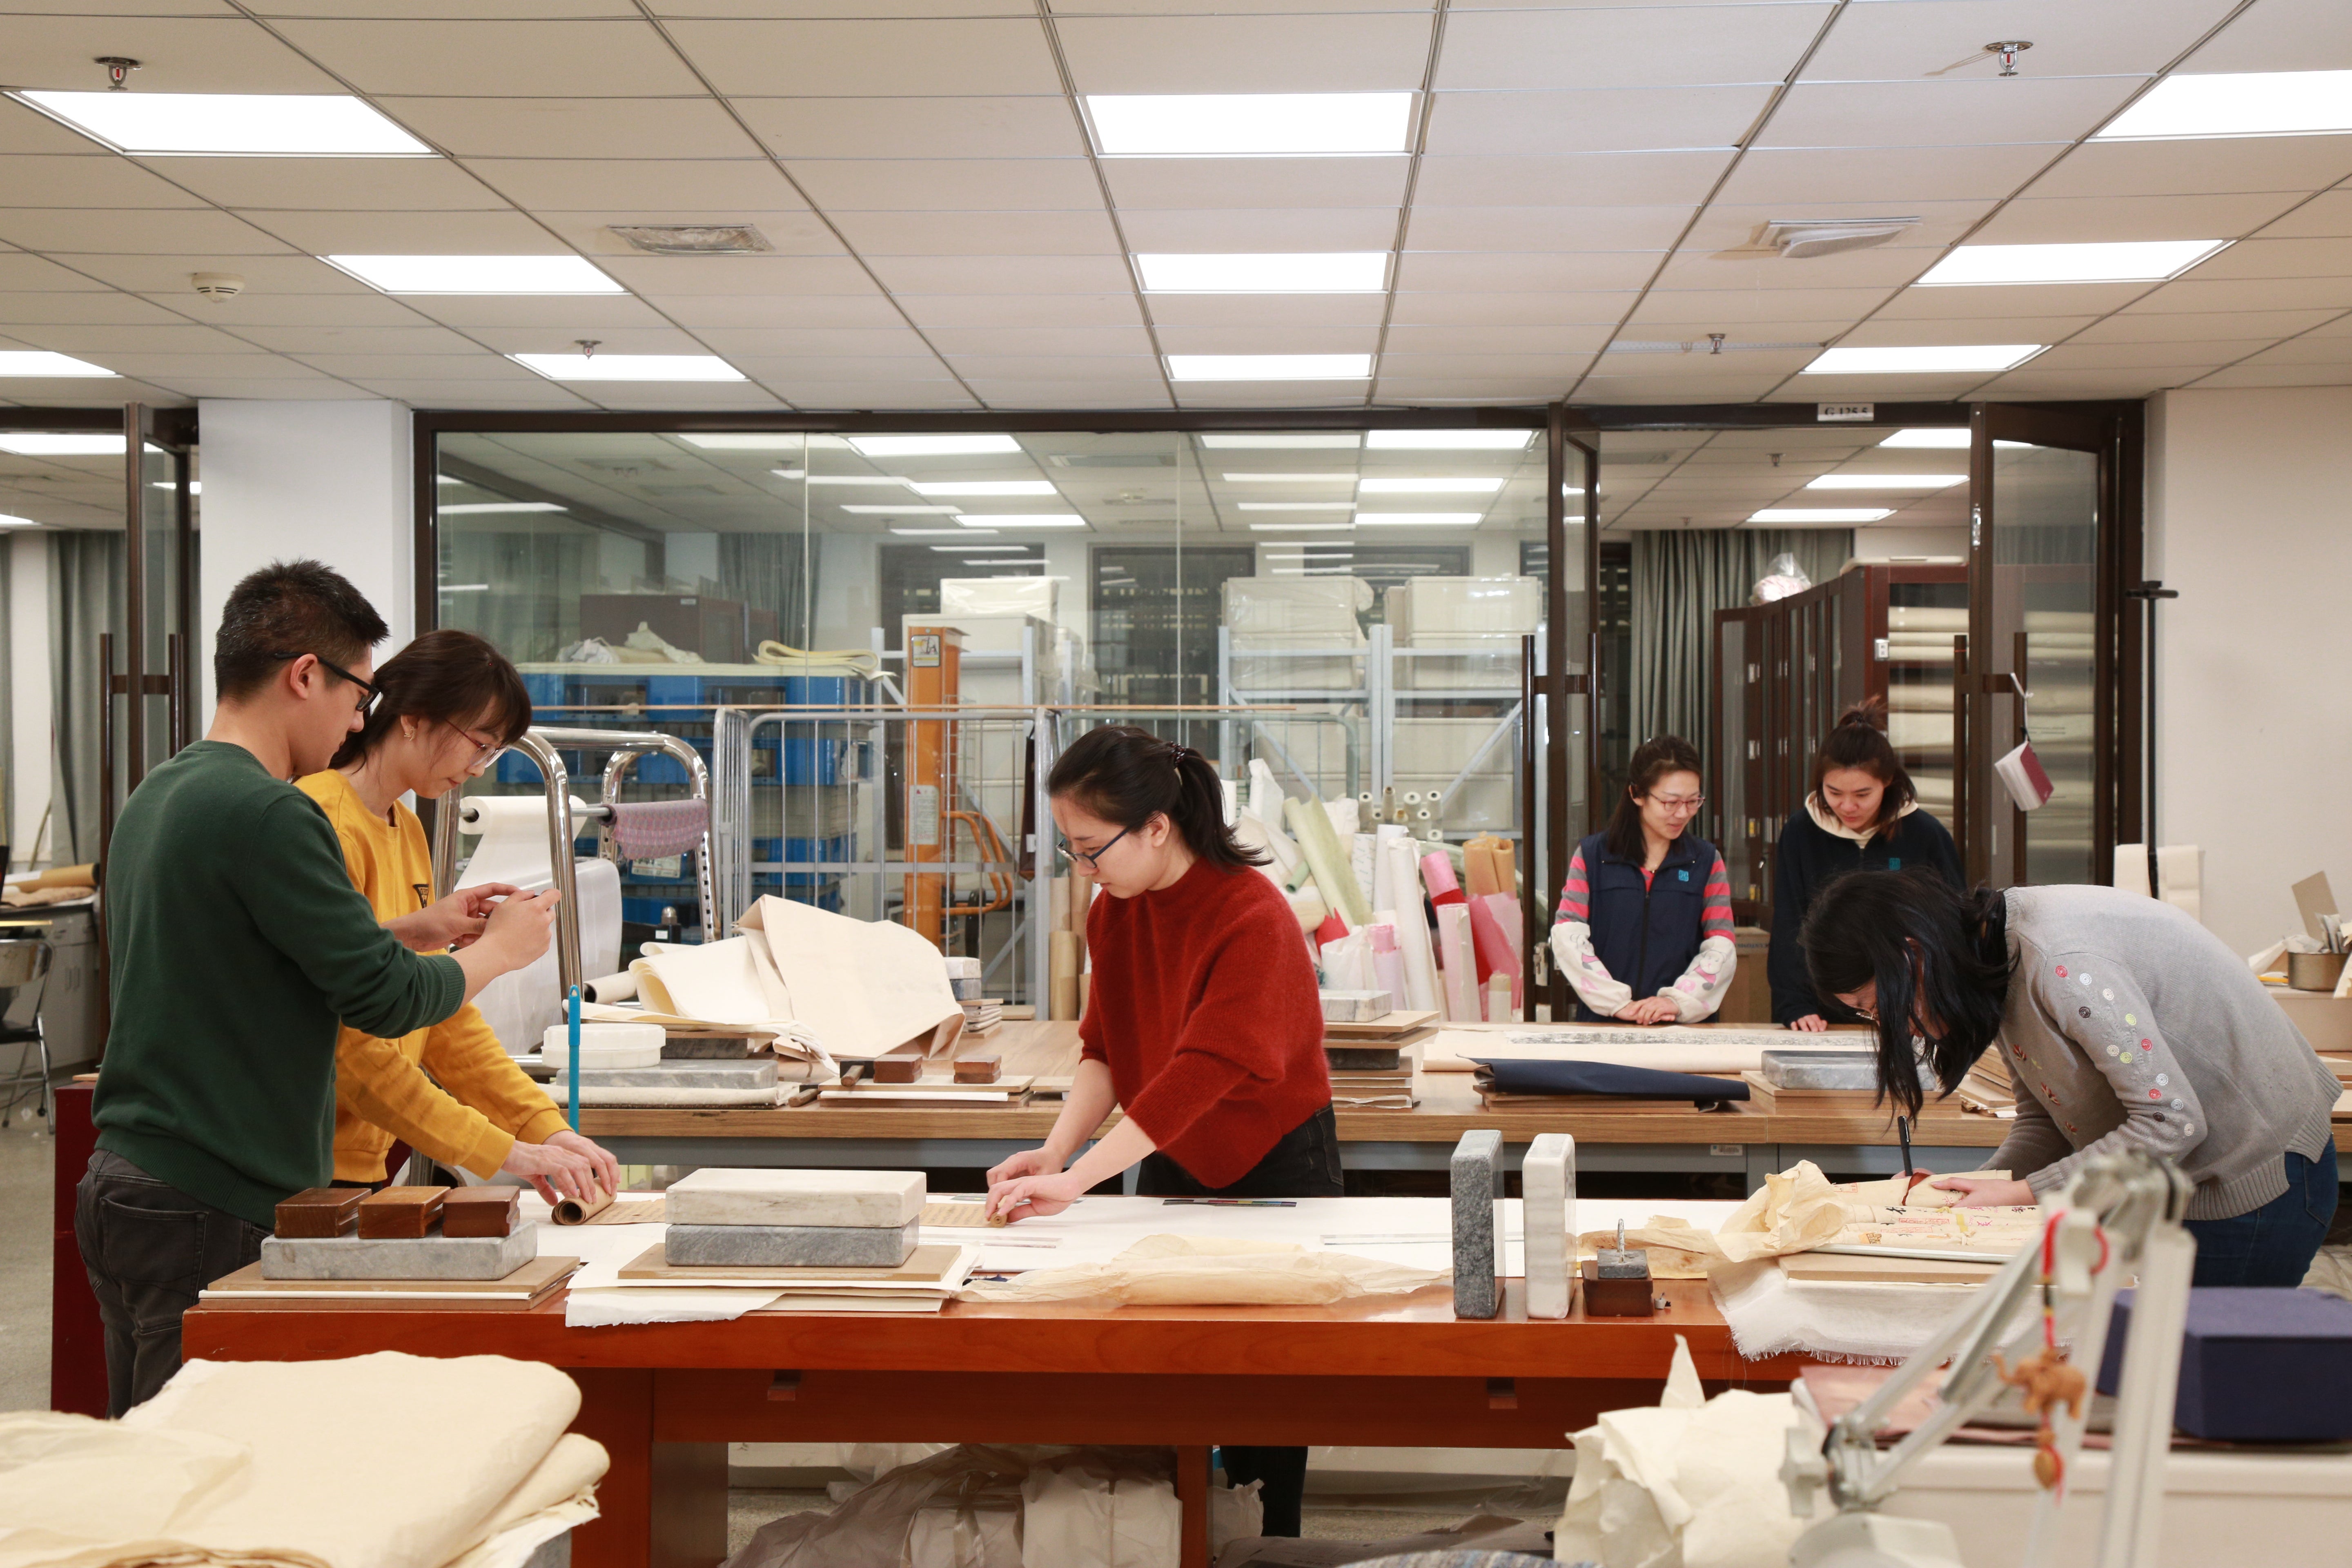 In the ancient book restoration department at the National Library of China a mixture of traditional craftsmanship and new technologies have been used